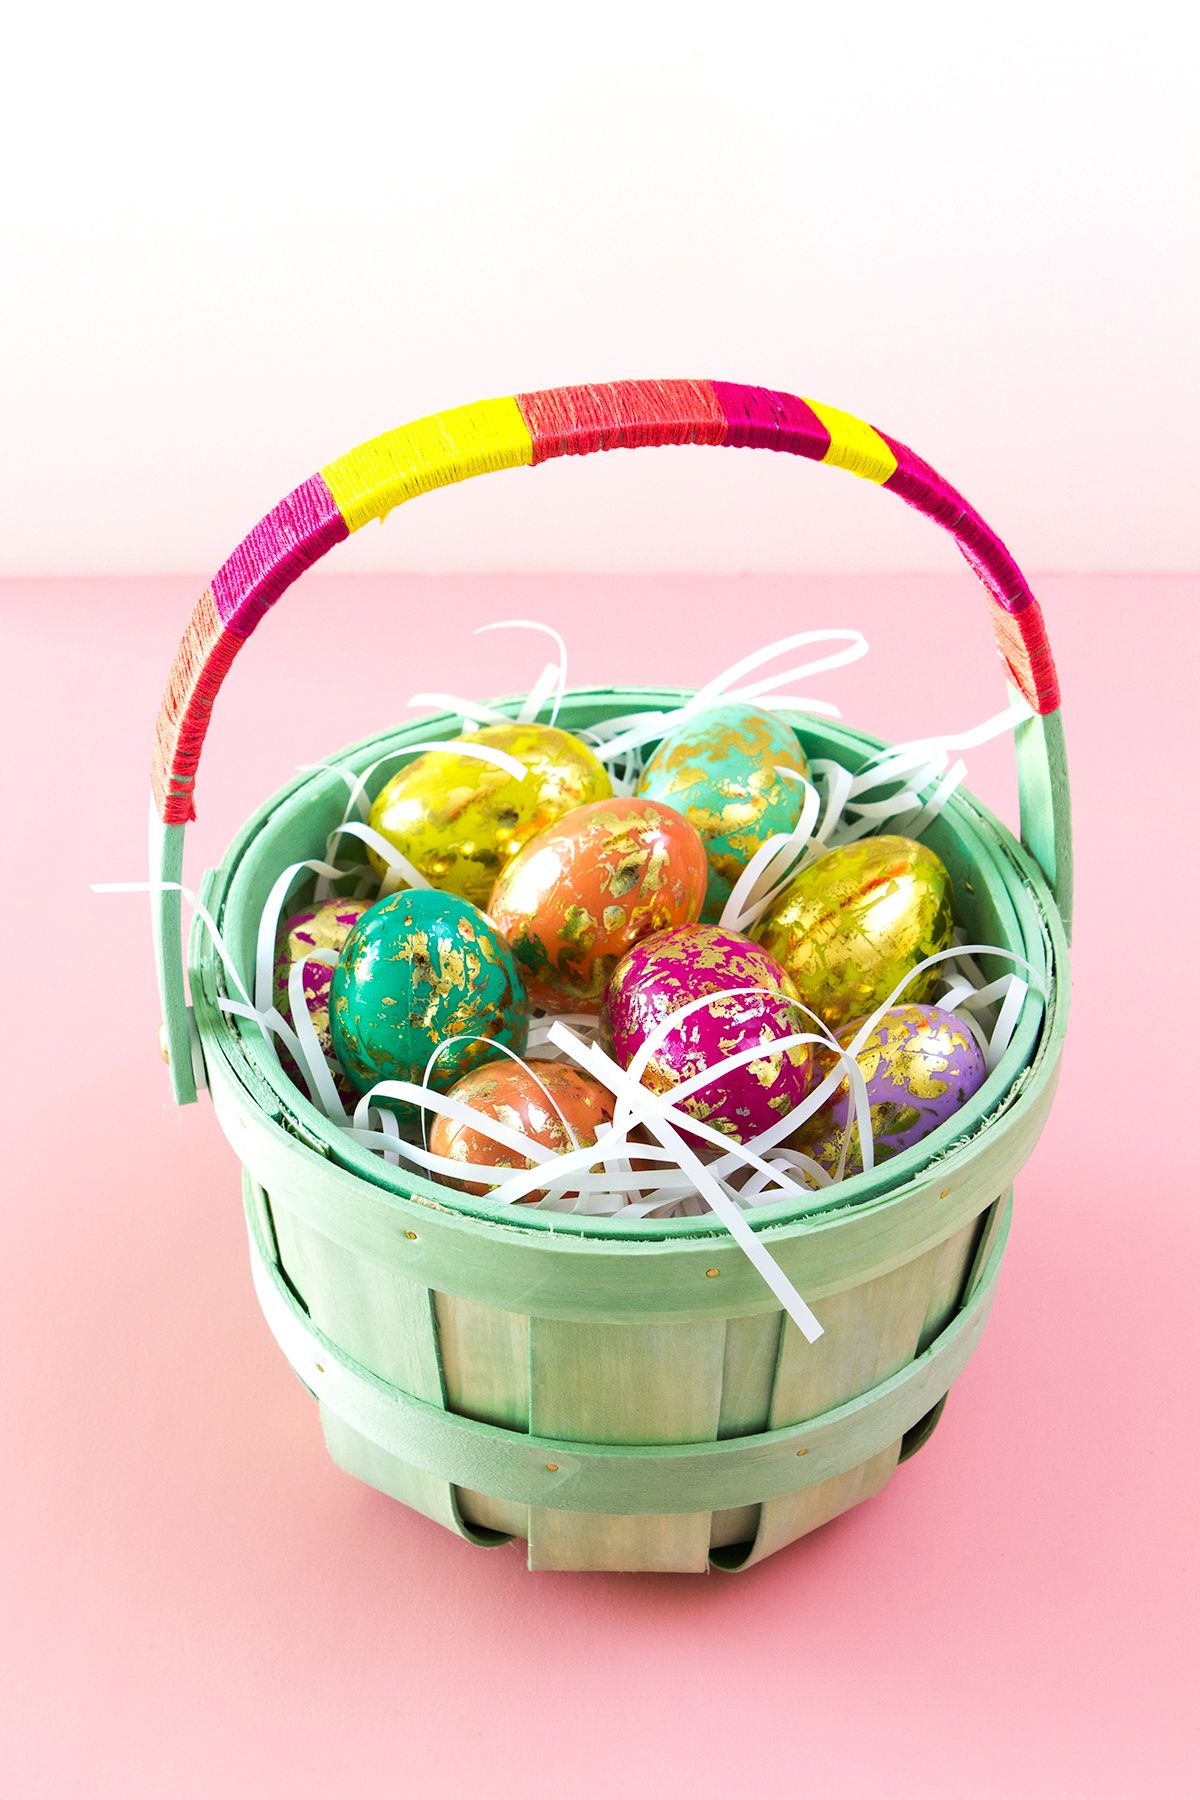 Easter Baking Gift Basket - Happiness is Homemade